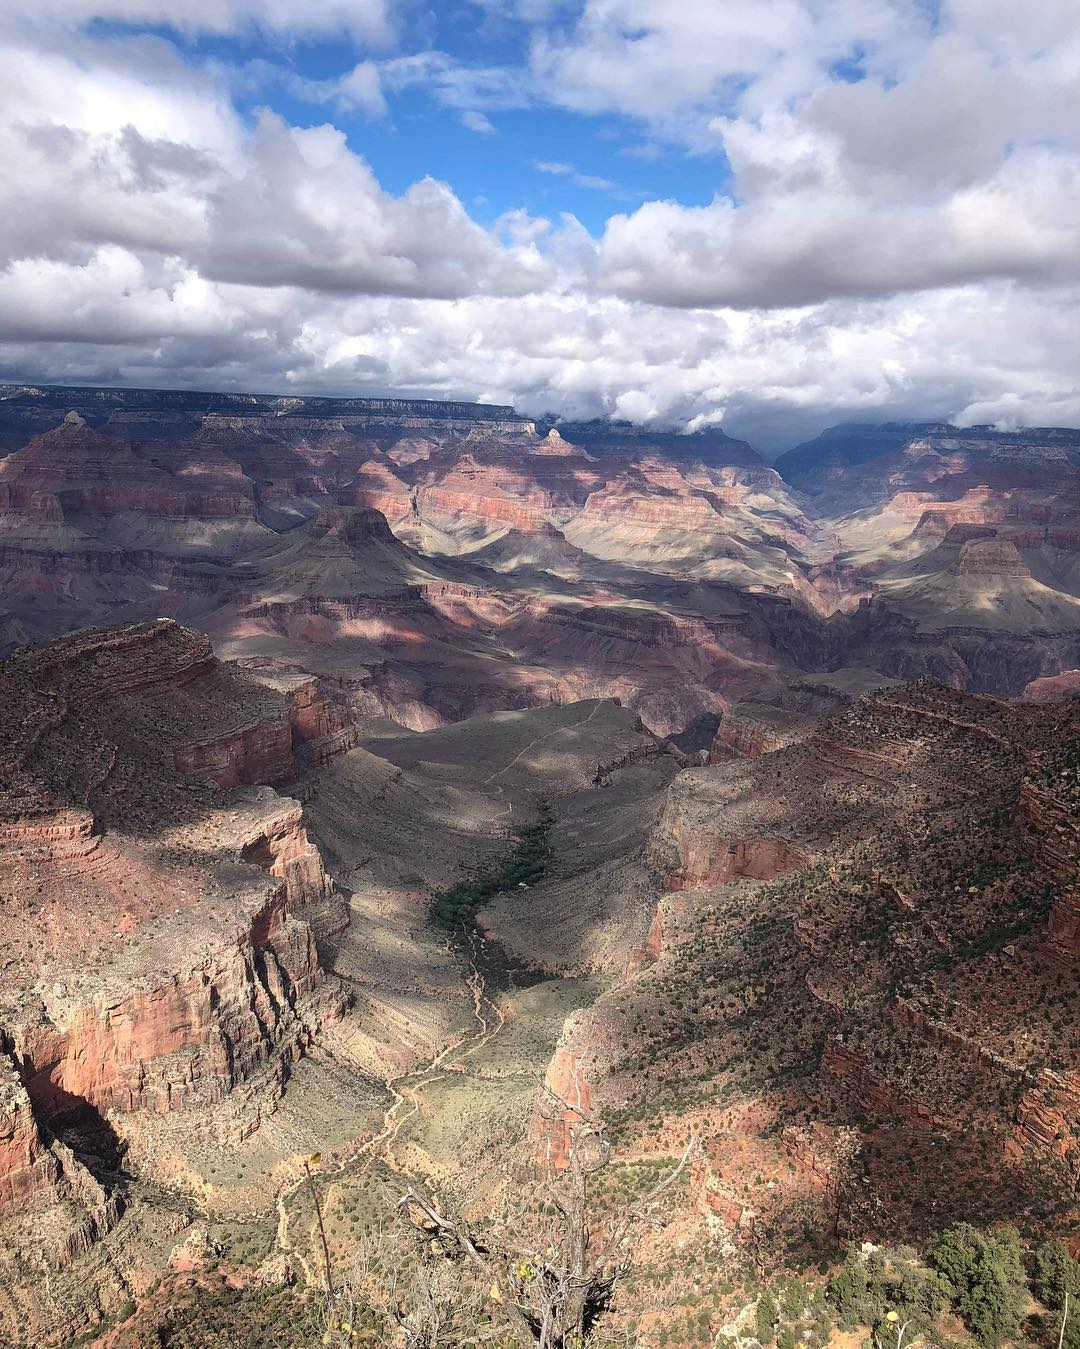 Top 7 National Parks in the USA - Grand Canyon